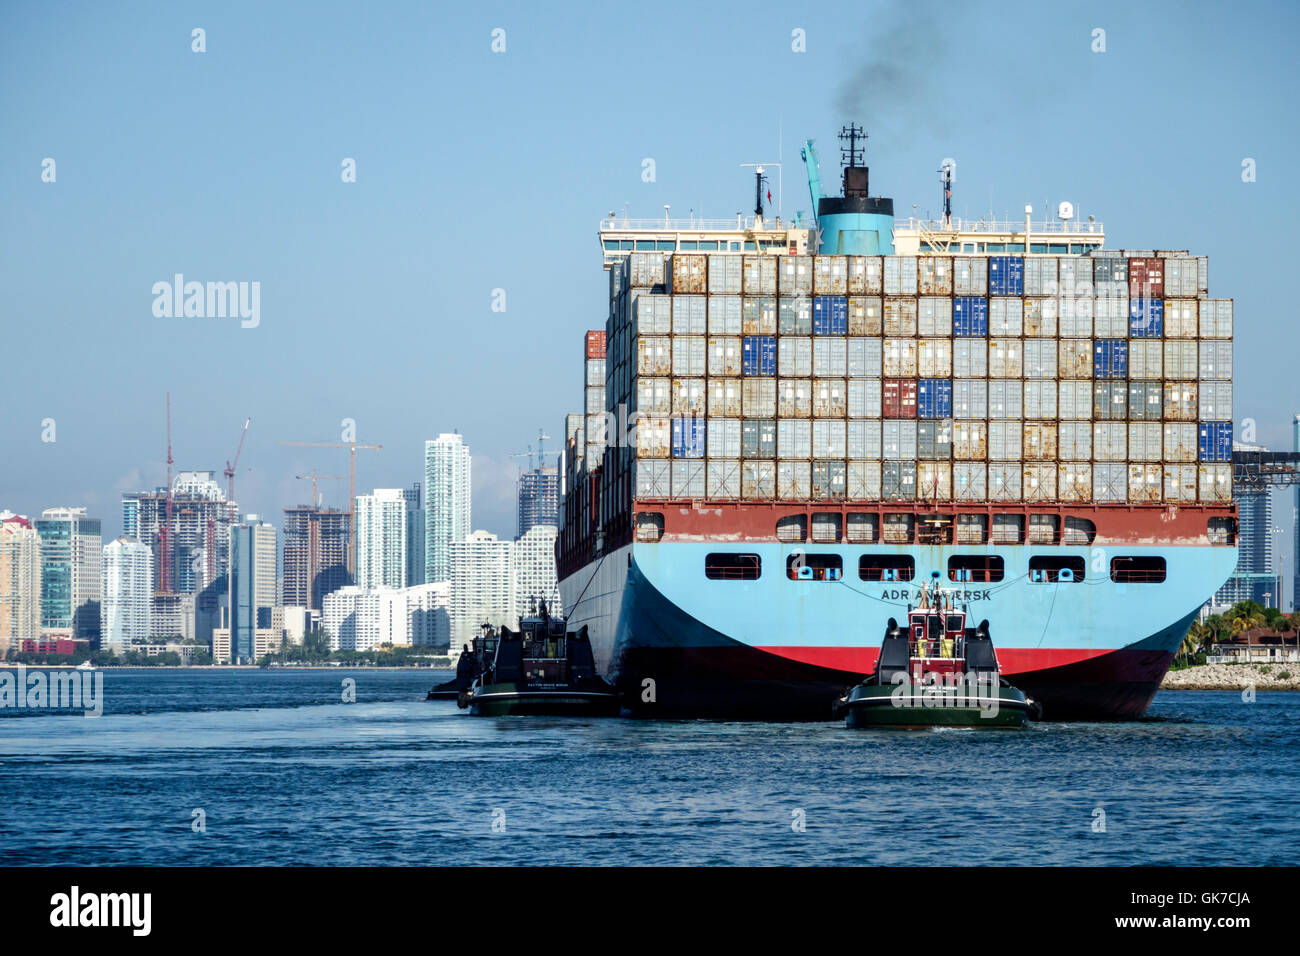 Miami Florida,Biscayne Bay,Port of Miami,Government Cut,shipping channel,water,container ship,cargo,Maersk Line,transportation,view from South Pointe Stock Photo